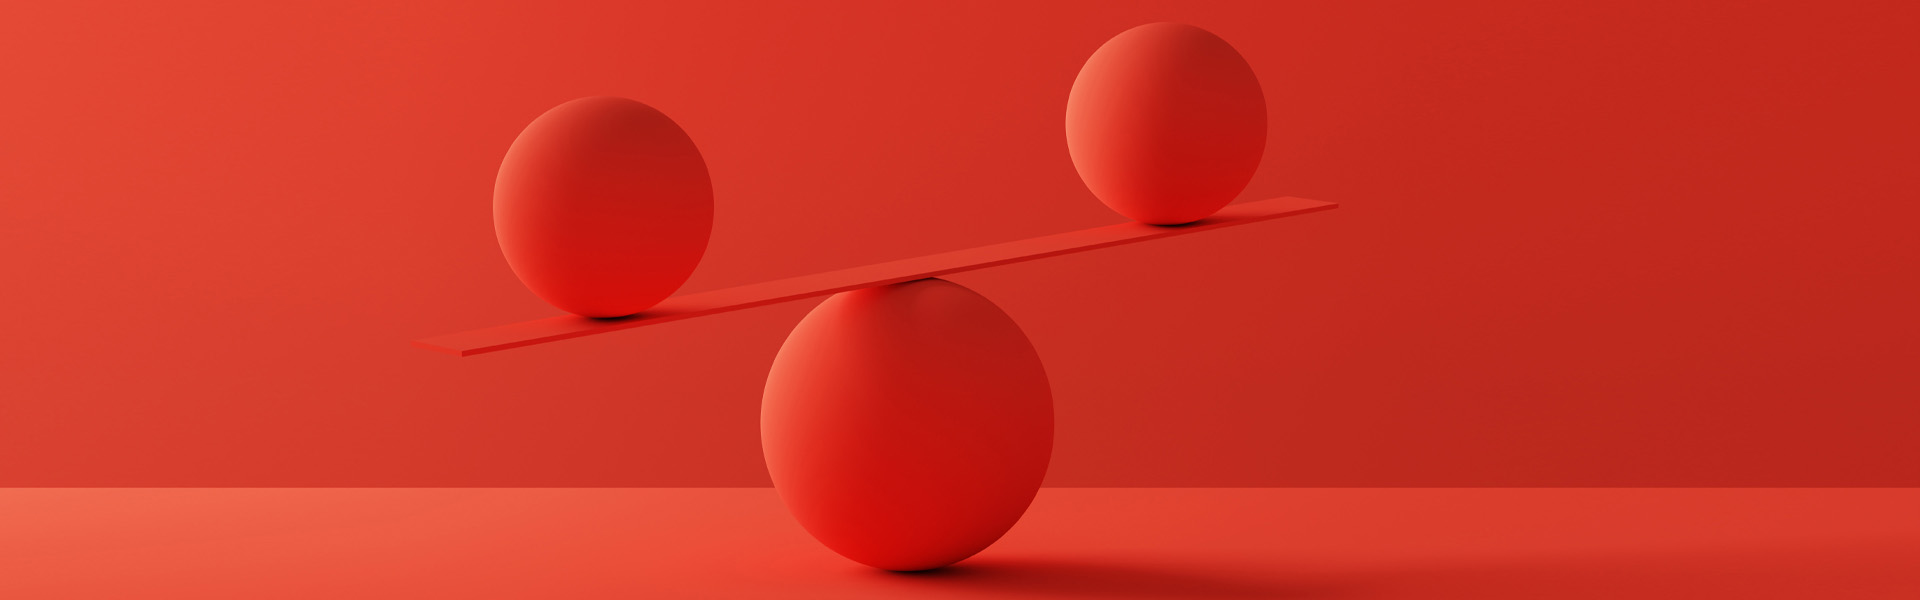 Two small balls showing as imbalanced on a large ball.